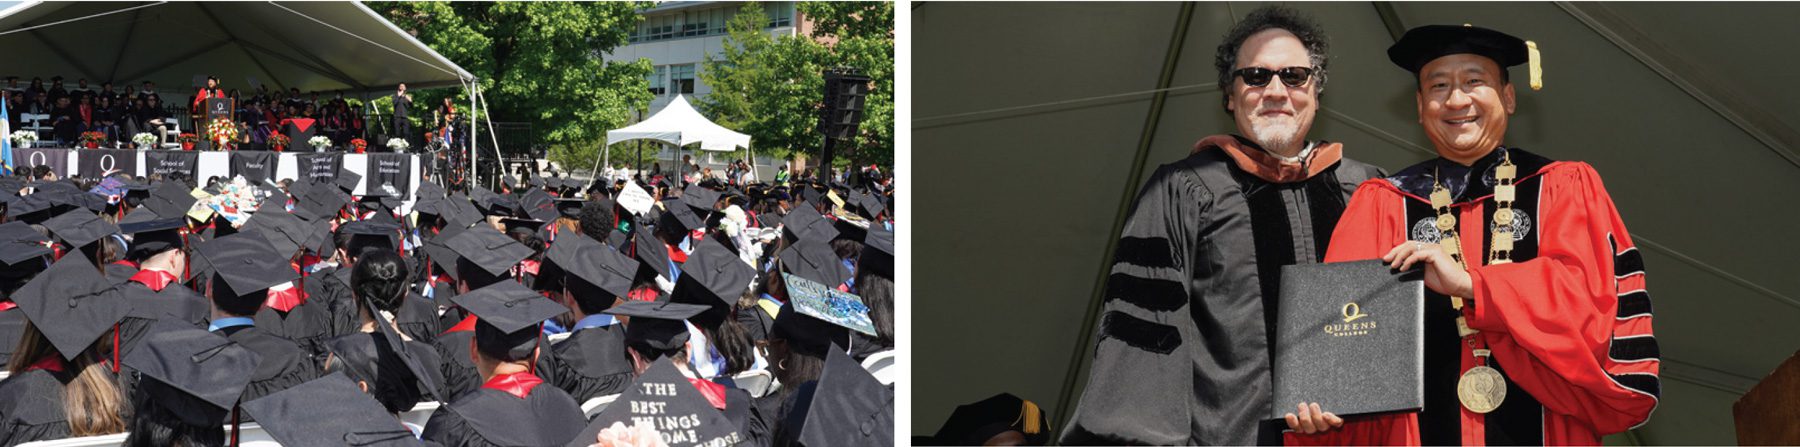 view of the stage on Commencement day and photo of Jon Favreau receiving his degree